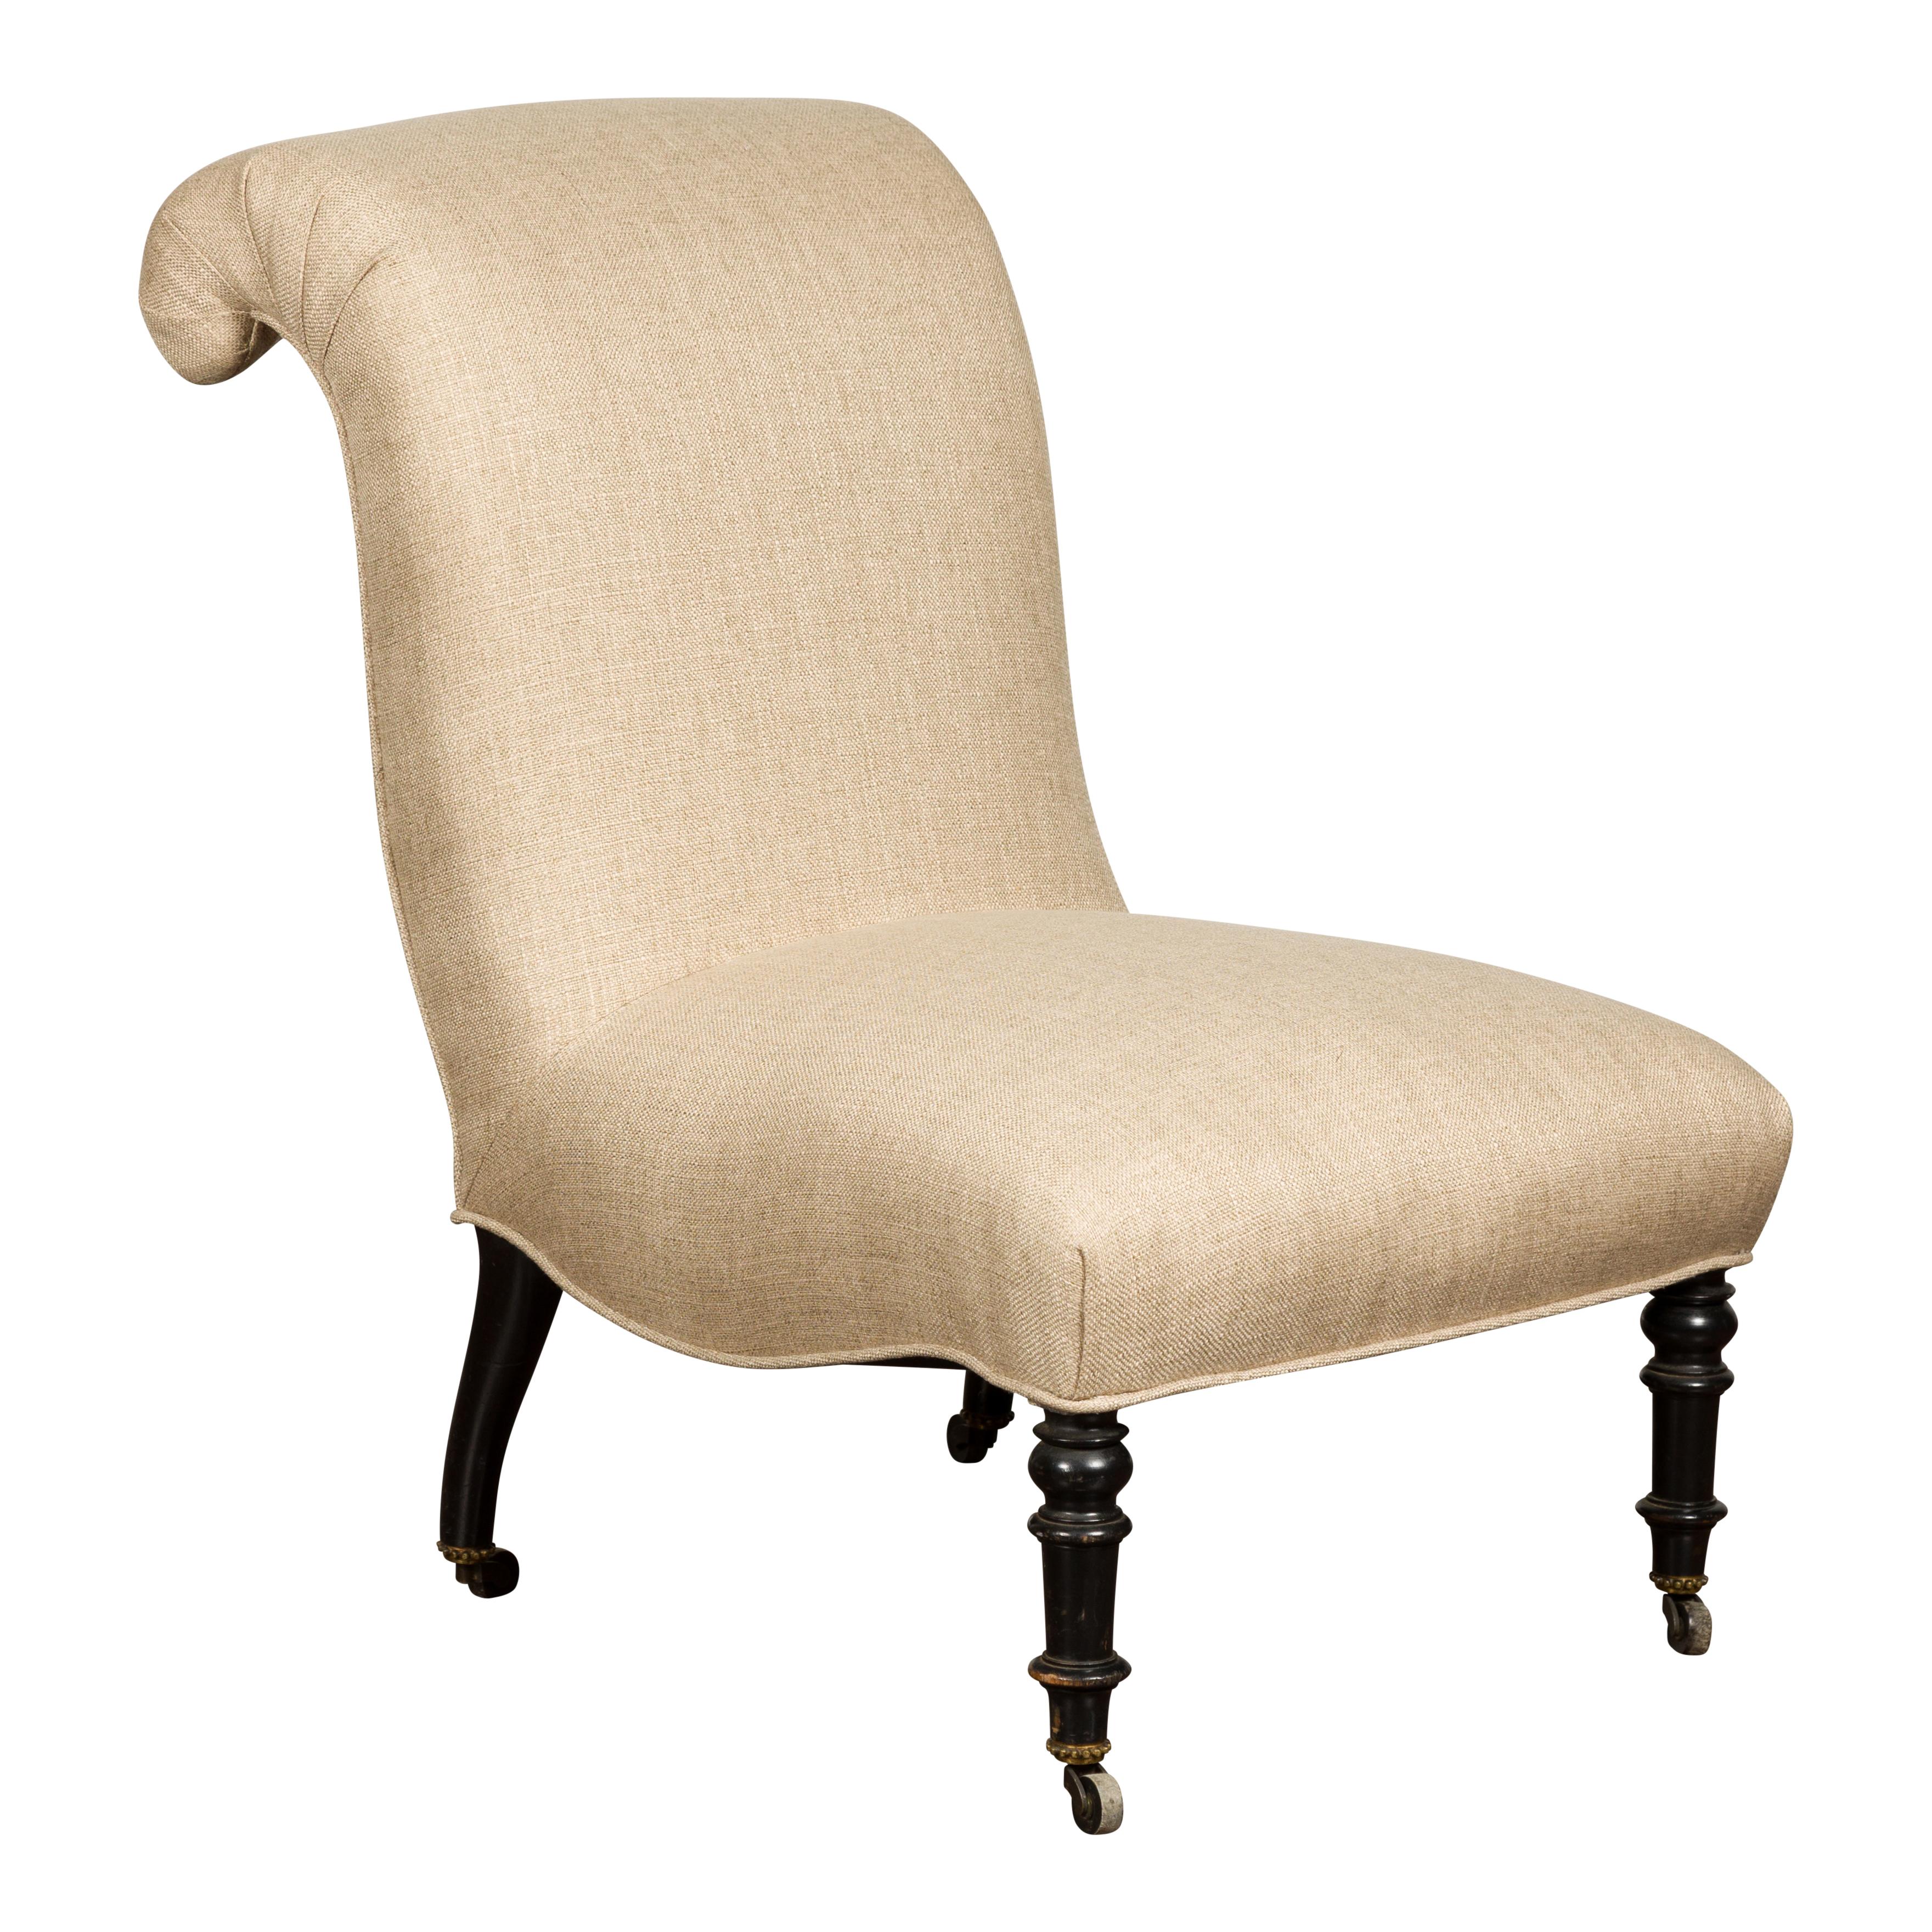 1900s Turn of the Century French Slipper Chair with Out-Scrolling Back 8